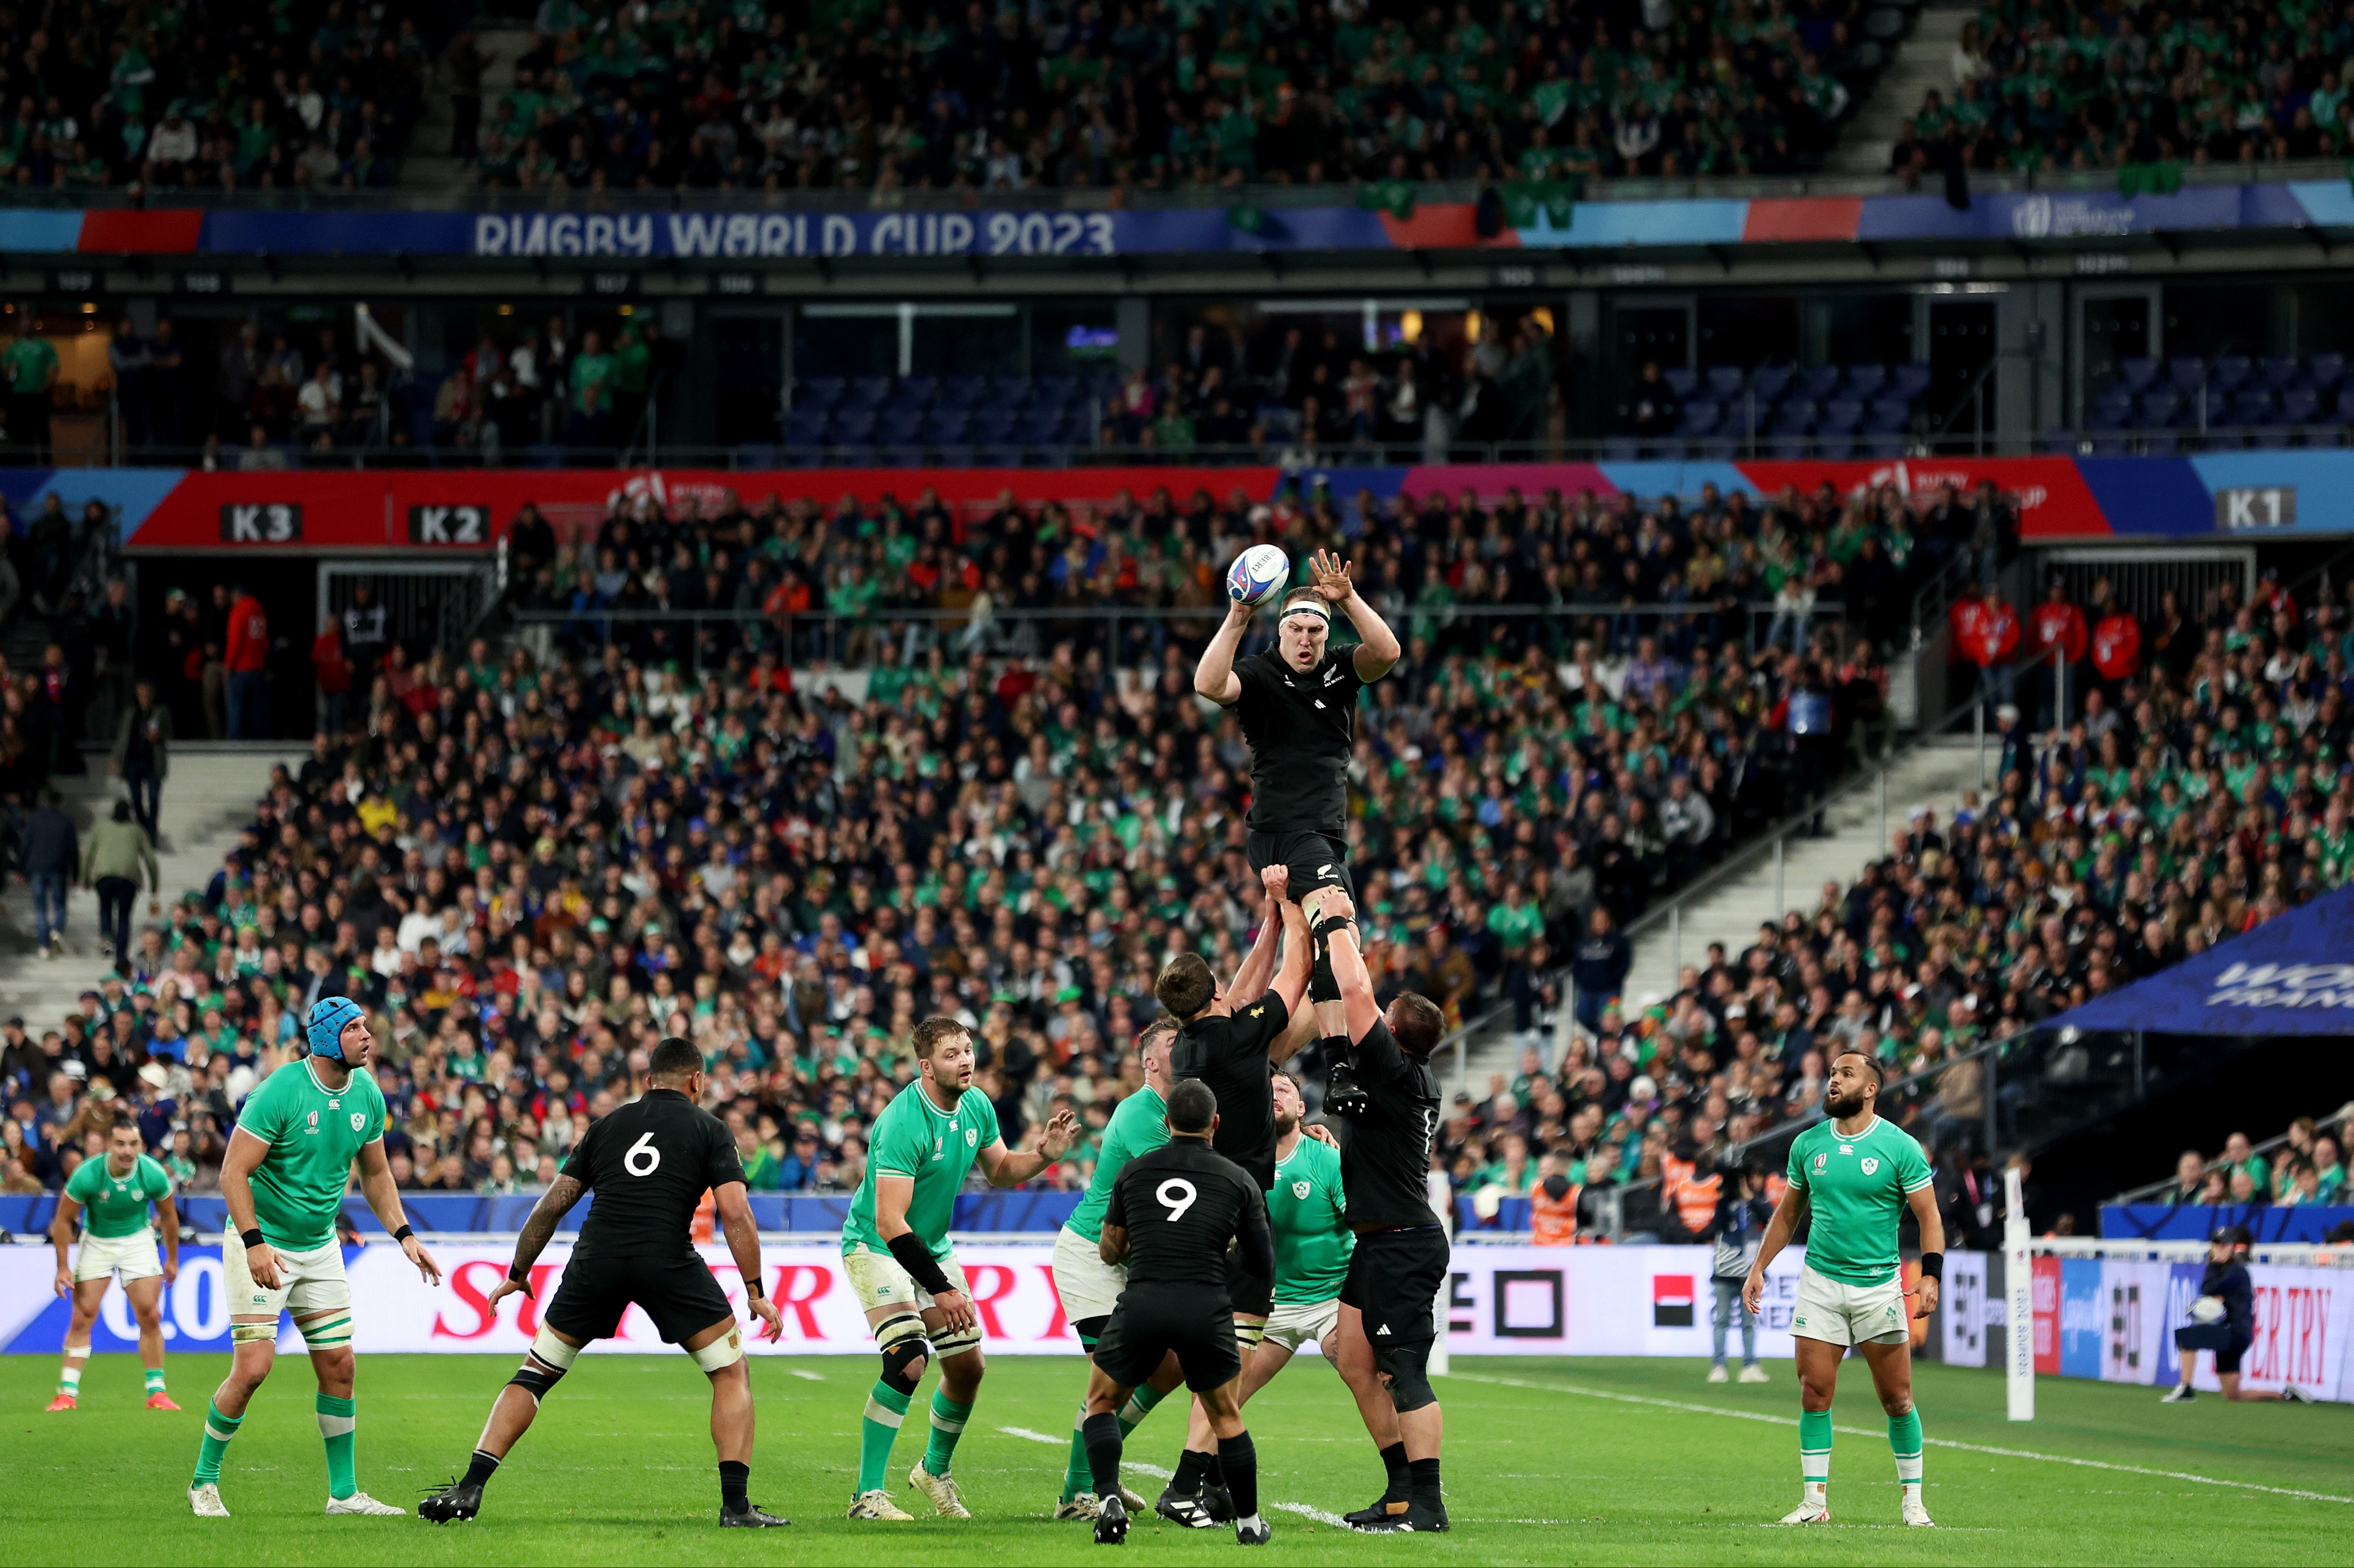 New Zealand’s lineout has been the best in the tournament